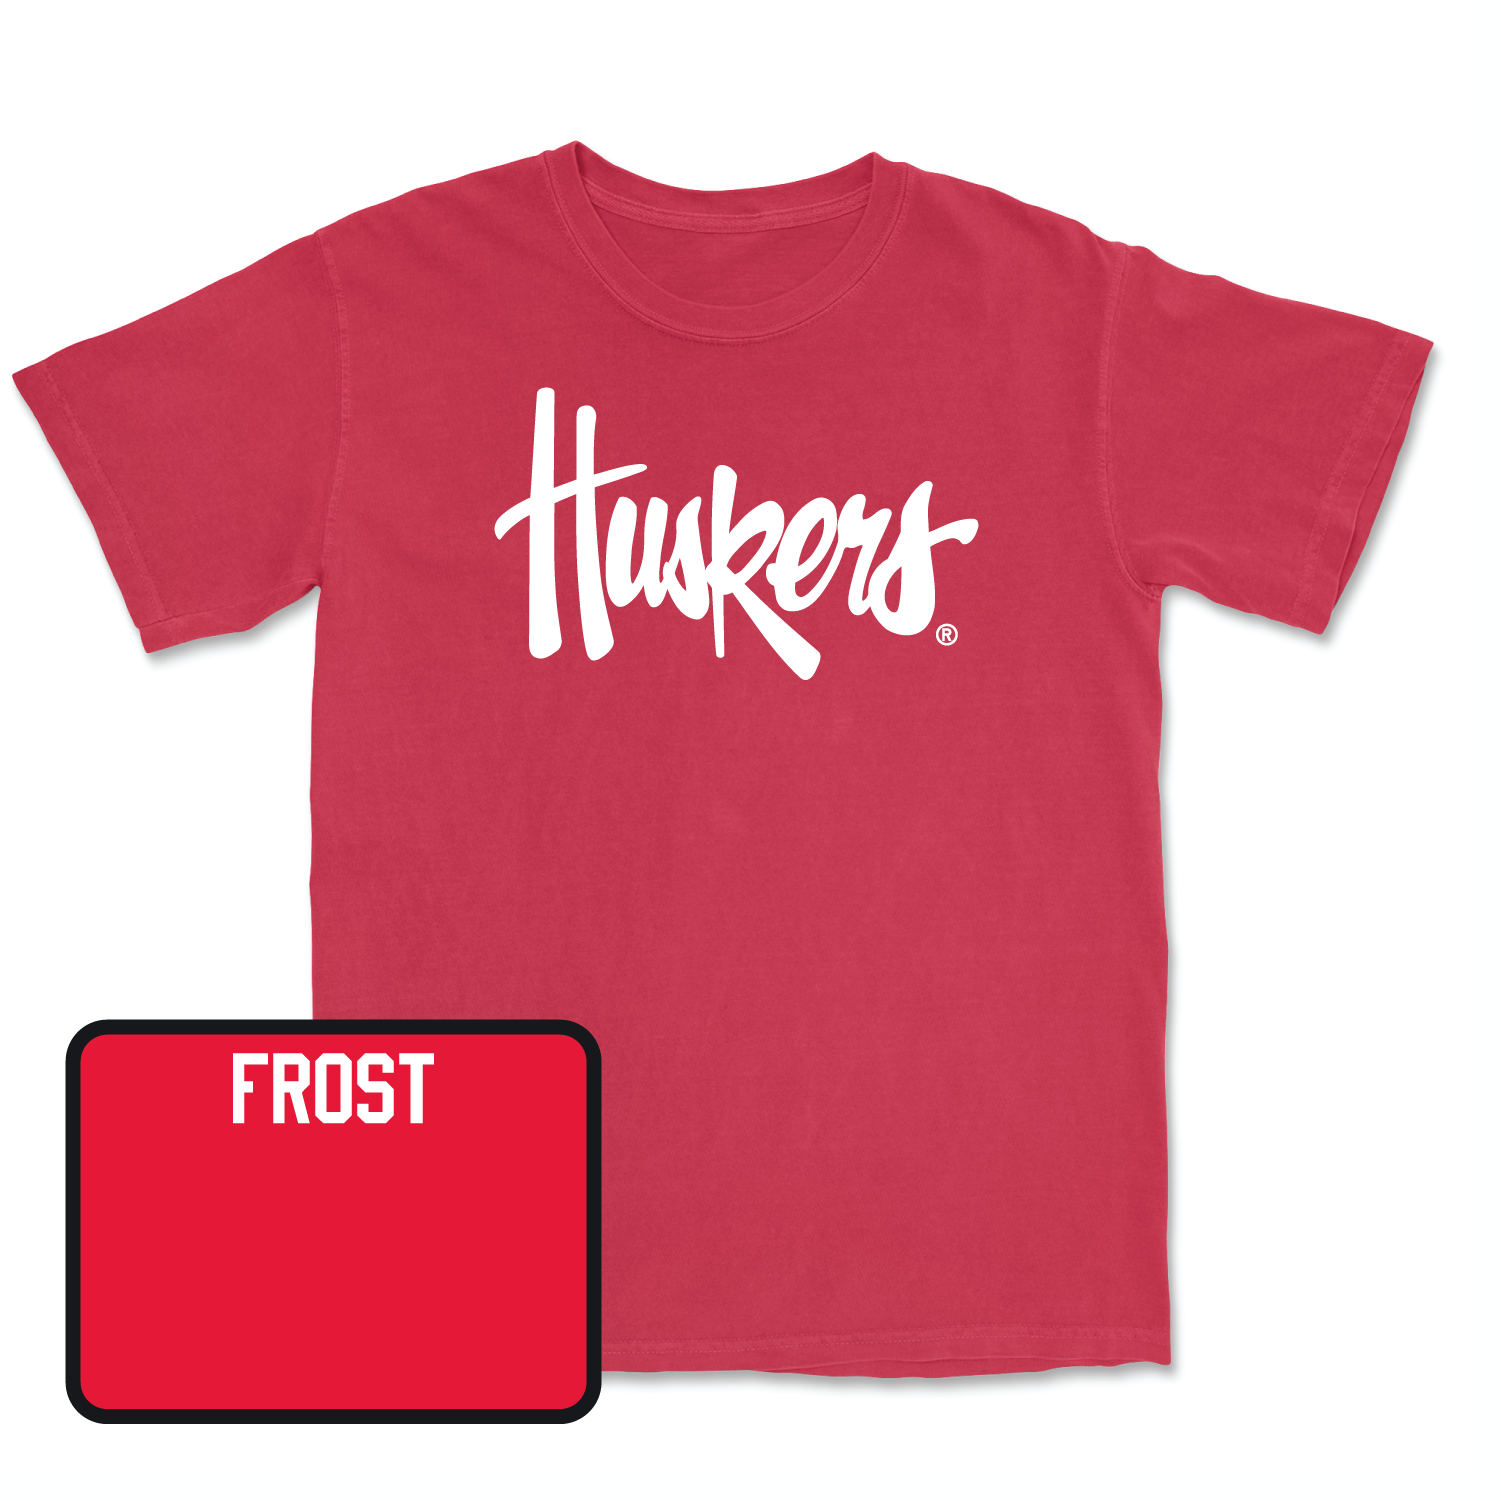 Red Women's Gymnastics Huskers Tee Large / Emalee Frost